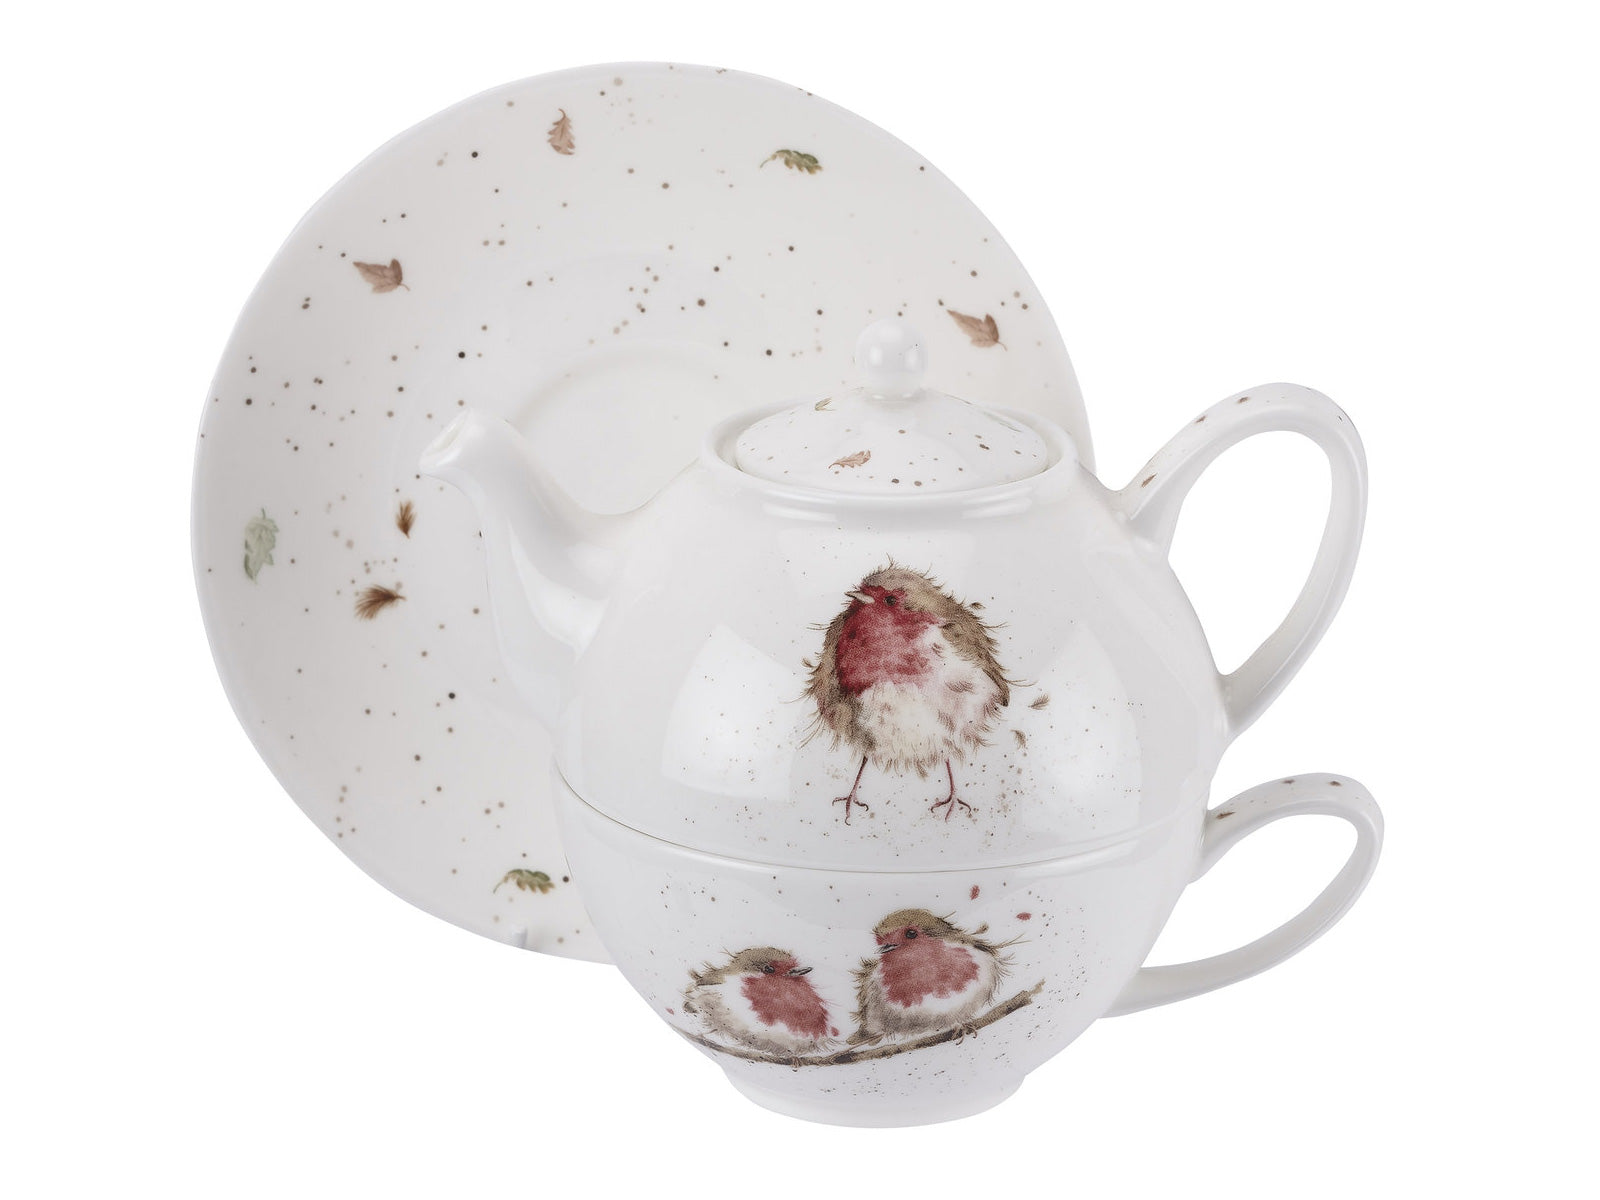 This Teapot and Saucer is stunning. With its vibrant colours of red and brown and exquisite detail within the illustration, it makes for the perfect cup of tea. Size: 0.30L - 10fl.oz. By: Wrendale. Product Code: WNLK3917-XW.